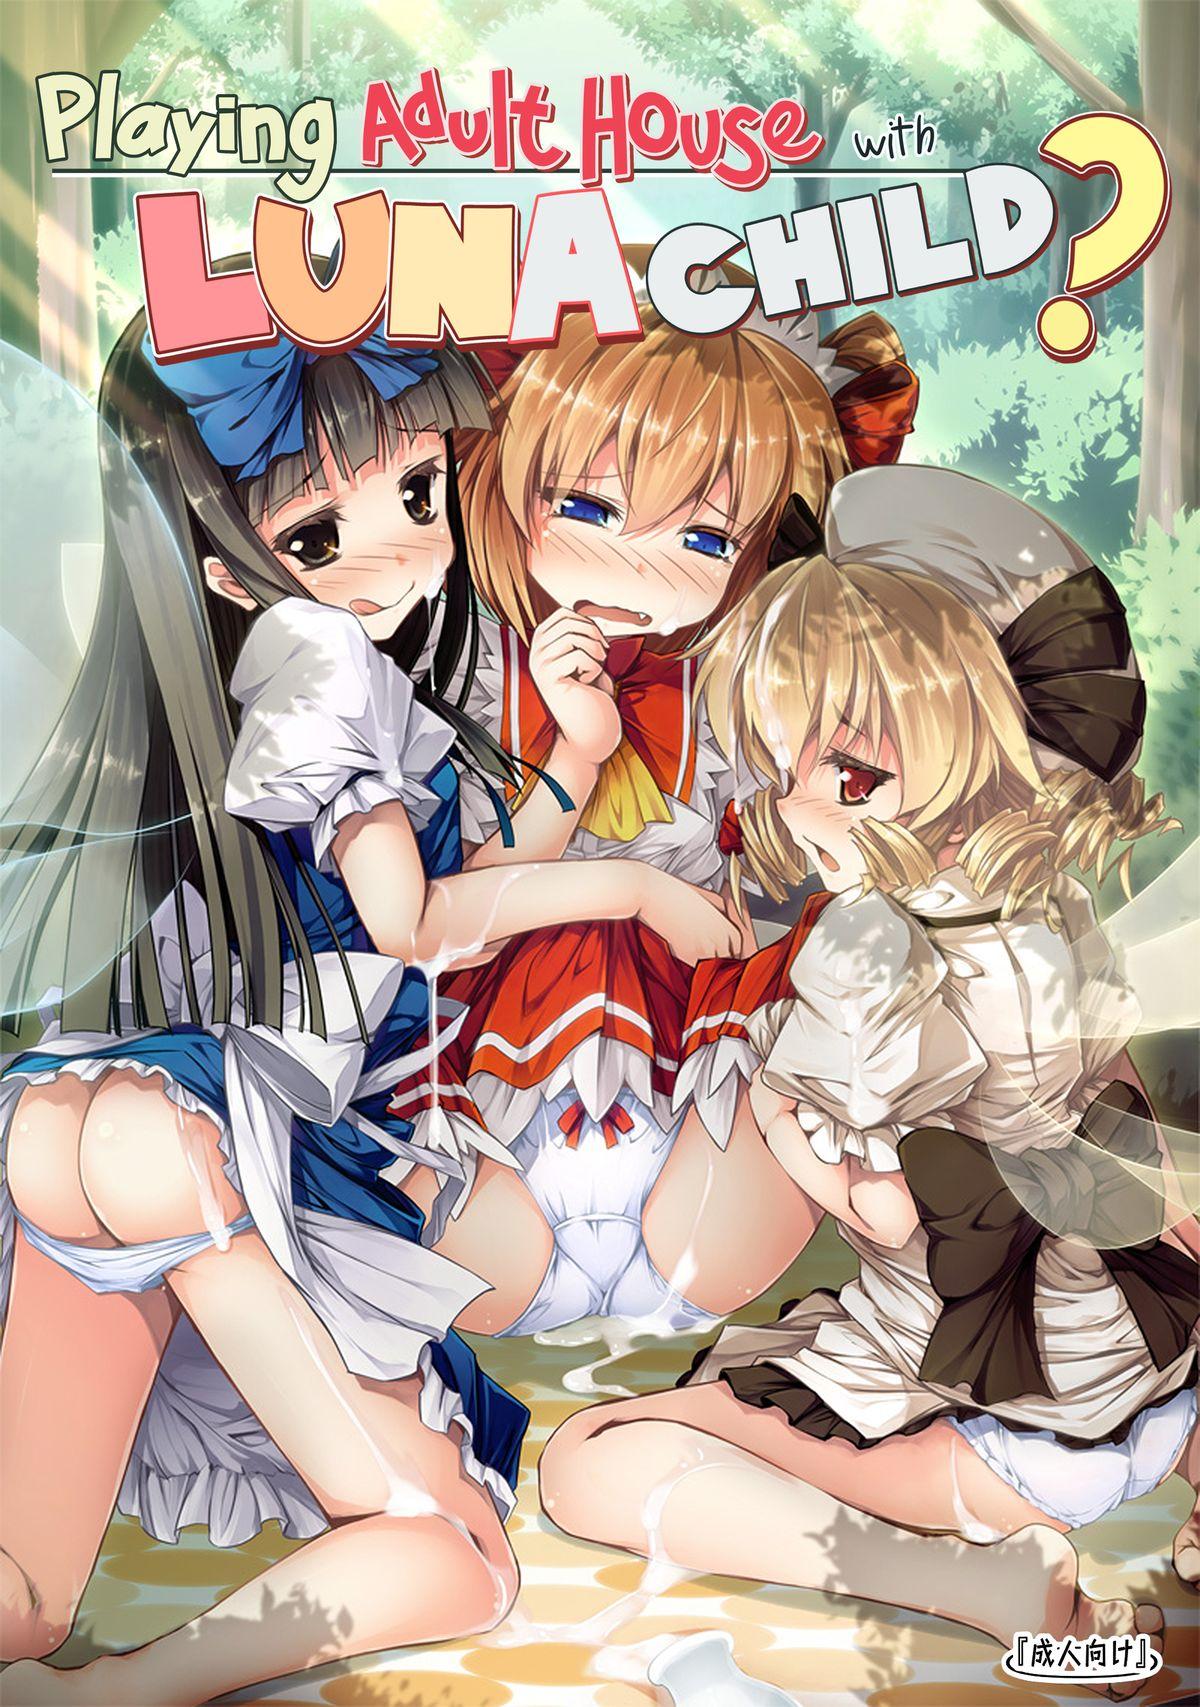 Perfect Girl Porn Luna-cha to Otona no Omamagoto? | Playing Adult House with Luna Child? - Touhou project Cuckolding - Picture 1